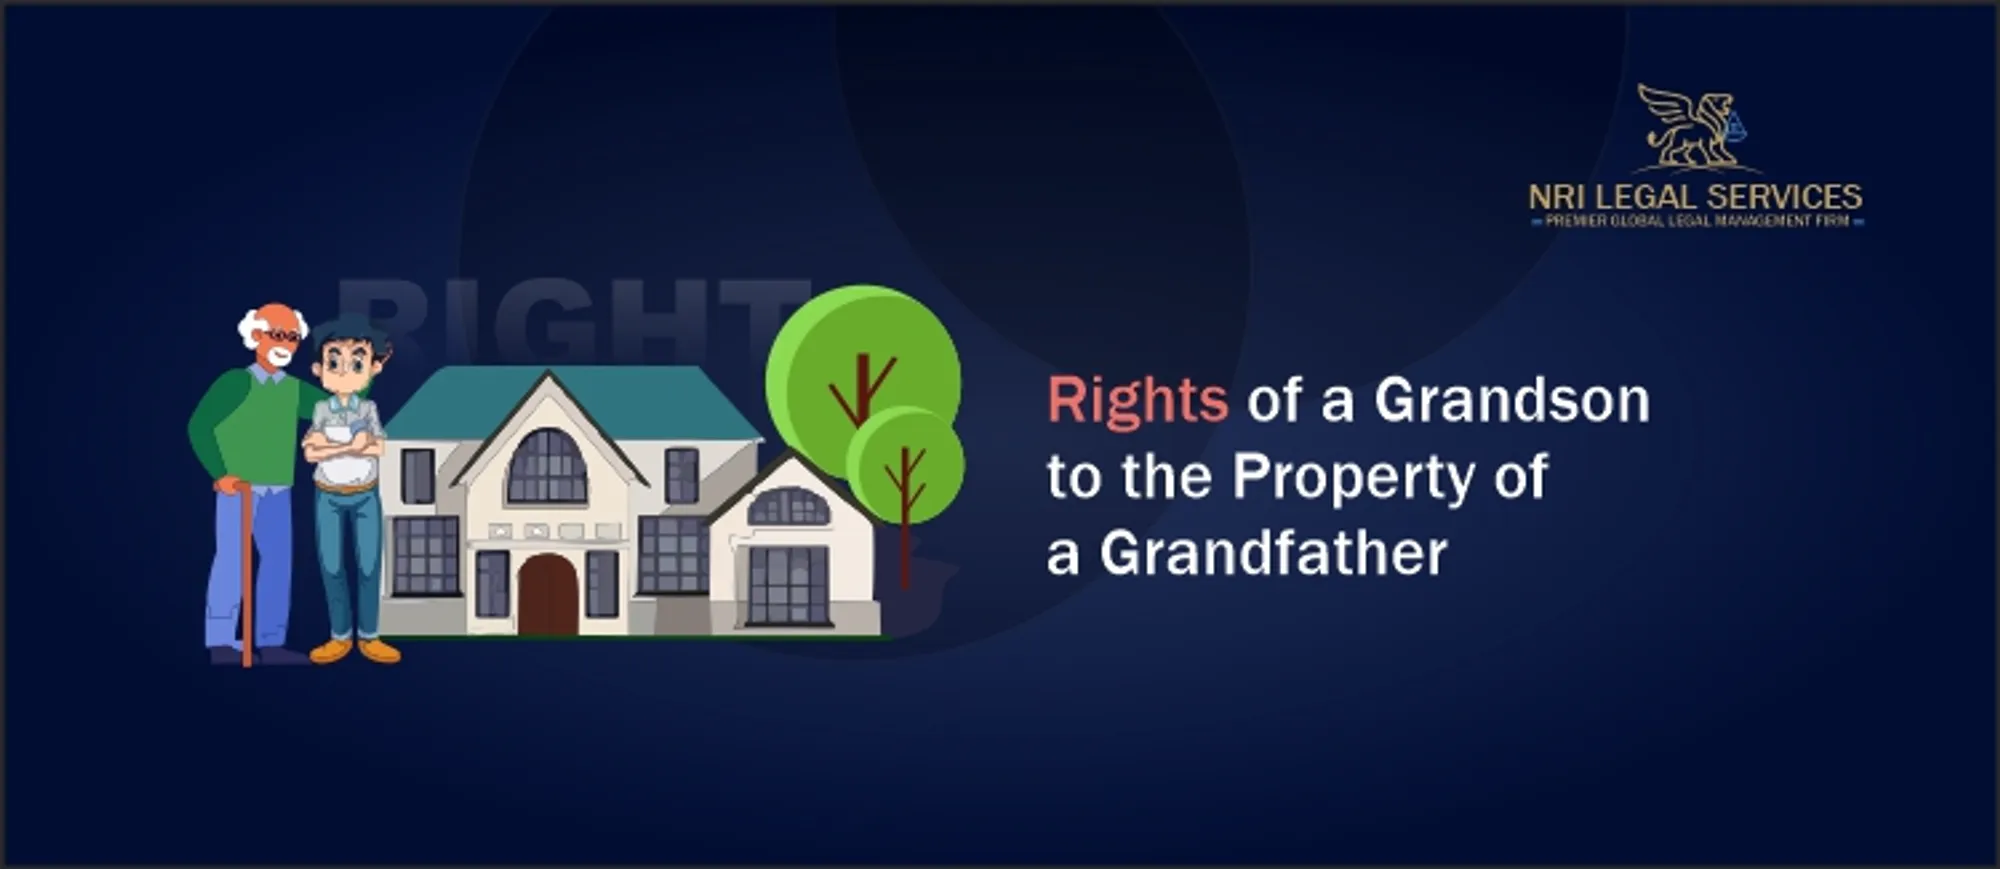 Rights of a grandson to the property of a grandfather